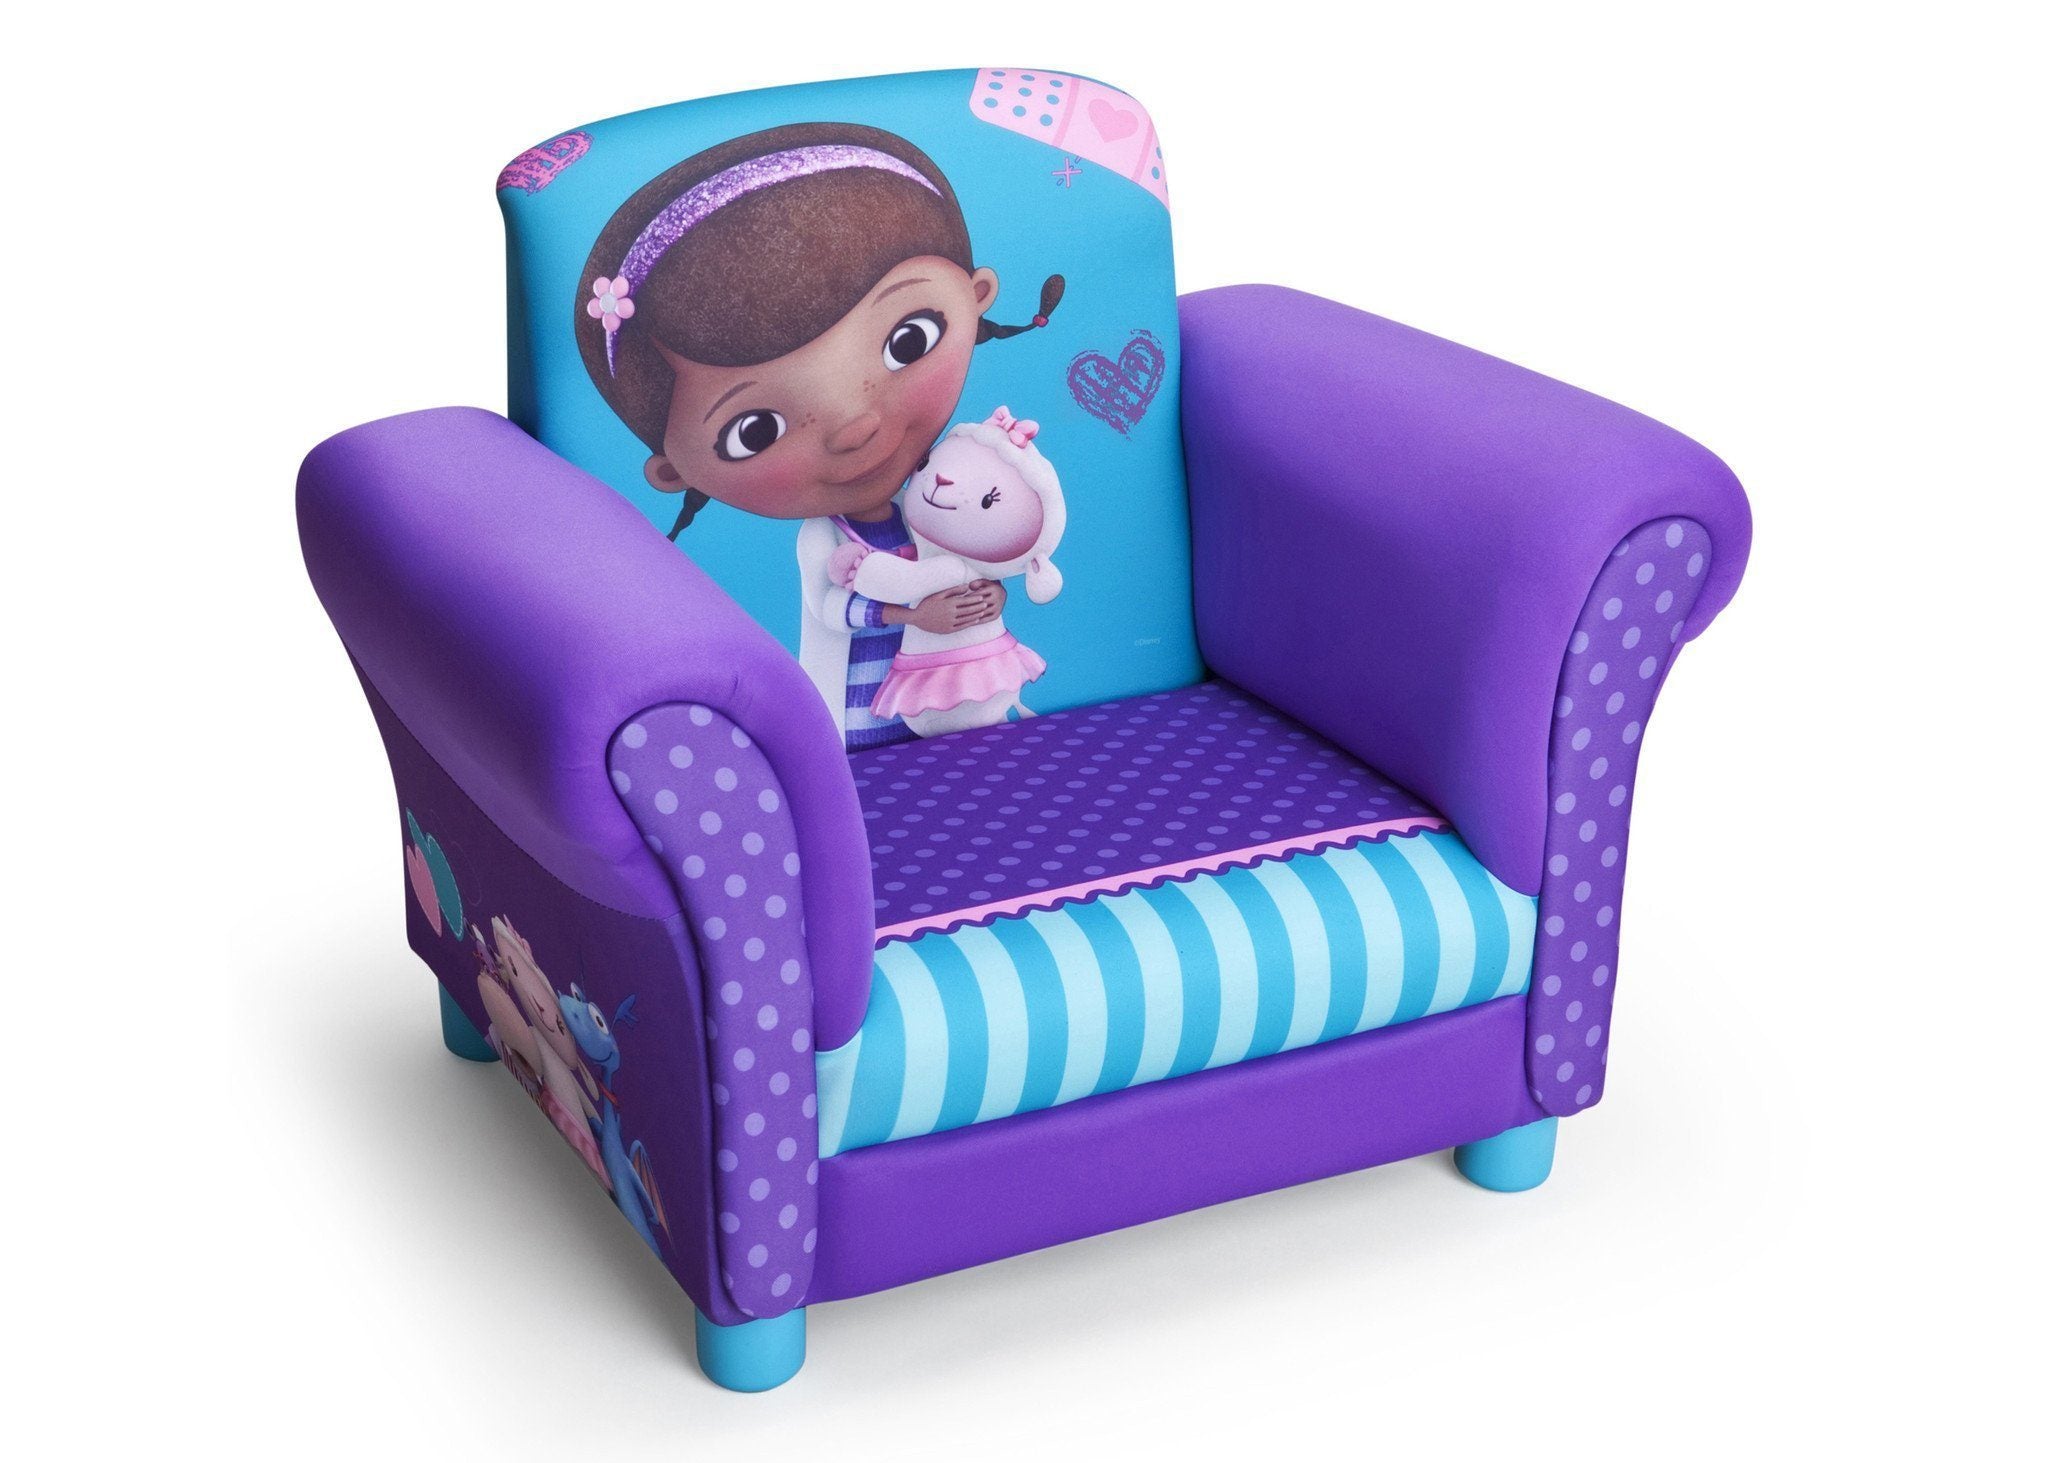 doc mcstuffins table and chairs